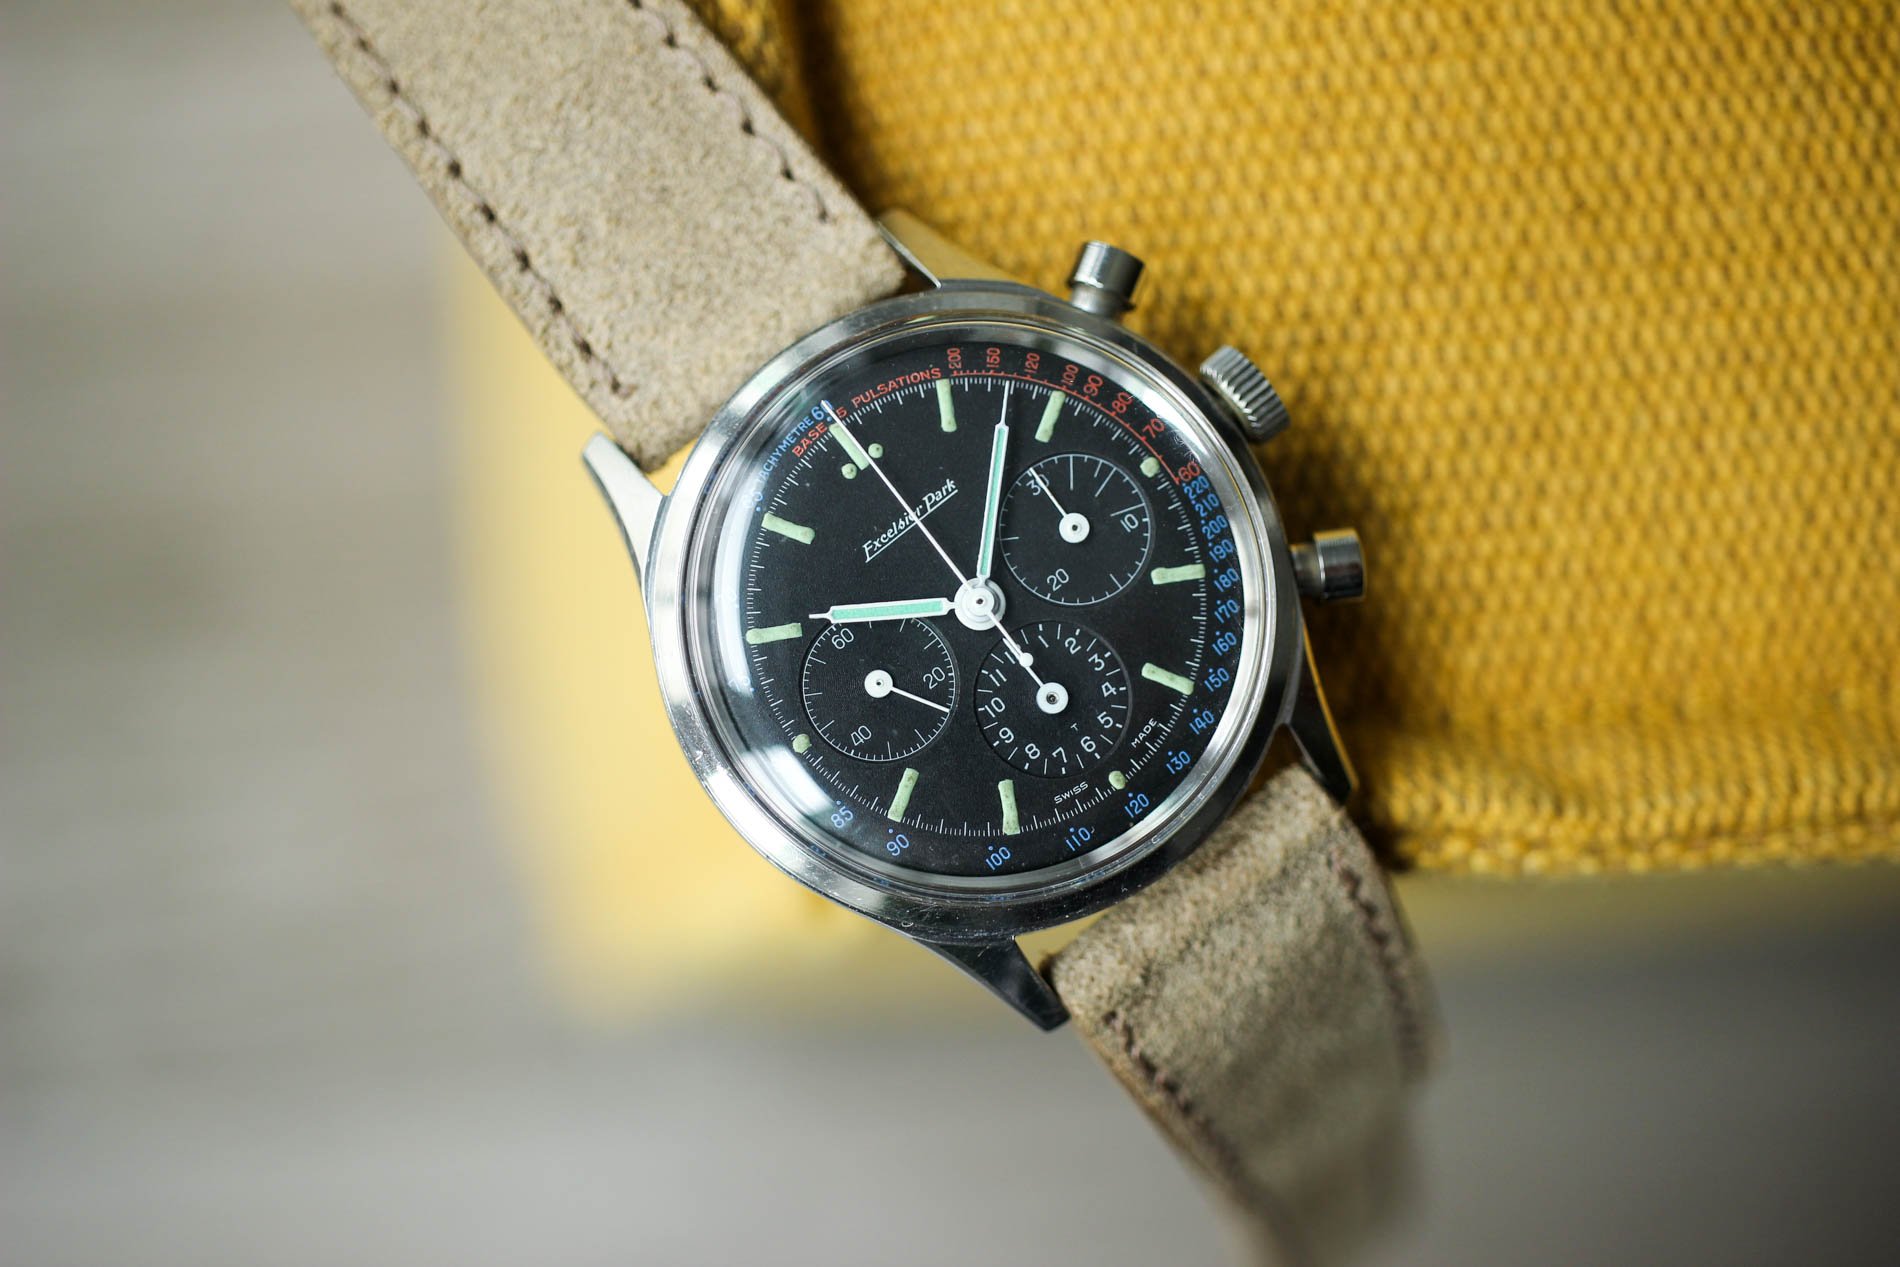 #TBT A Black-Dialed Solitaire ? An Excelsior Park “Olimpico” Chronograph With A Pulsation Track